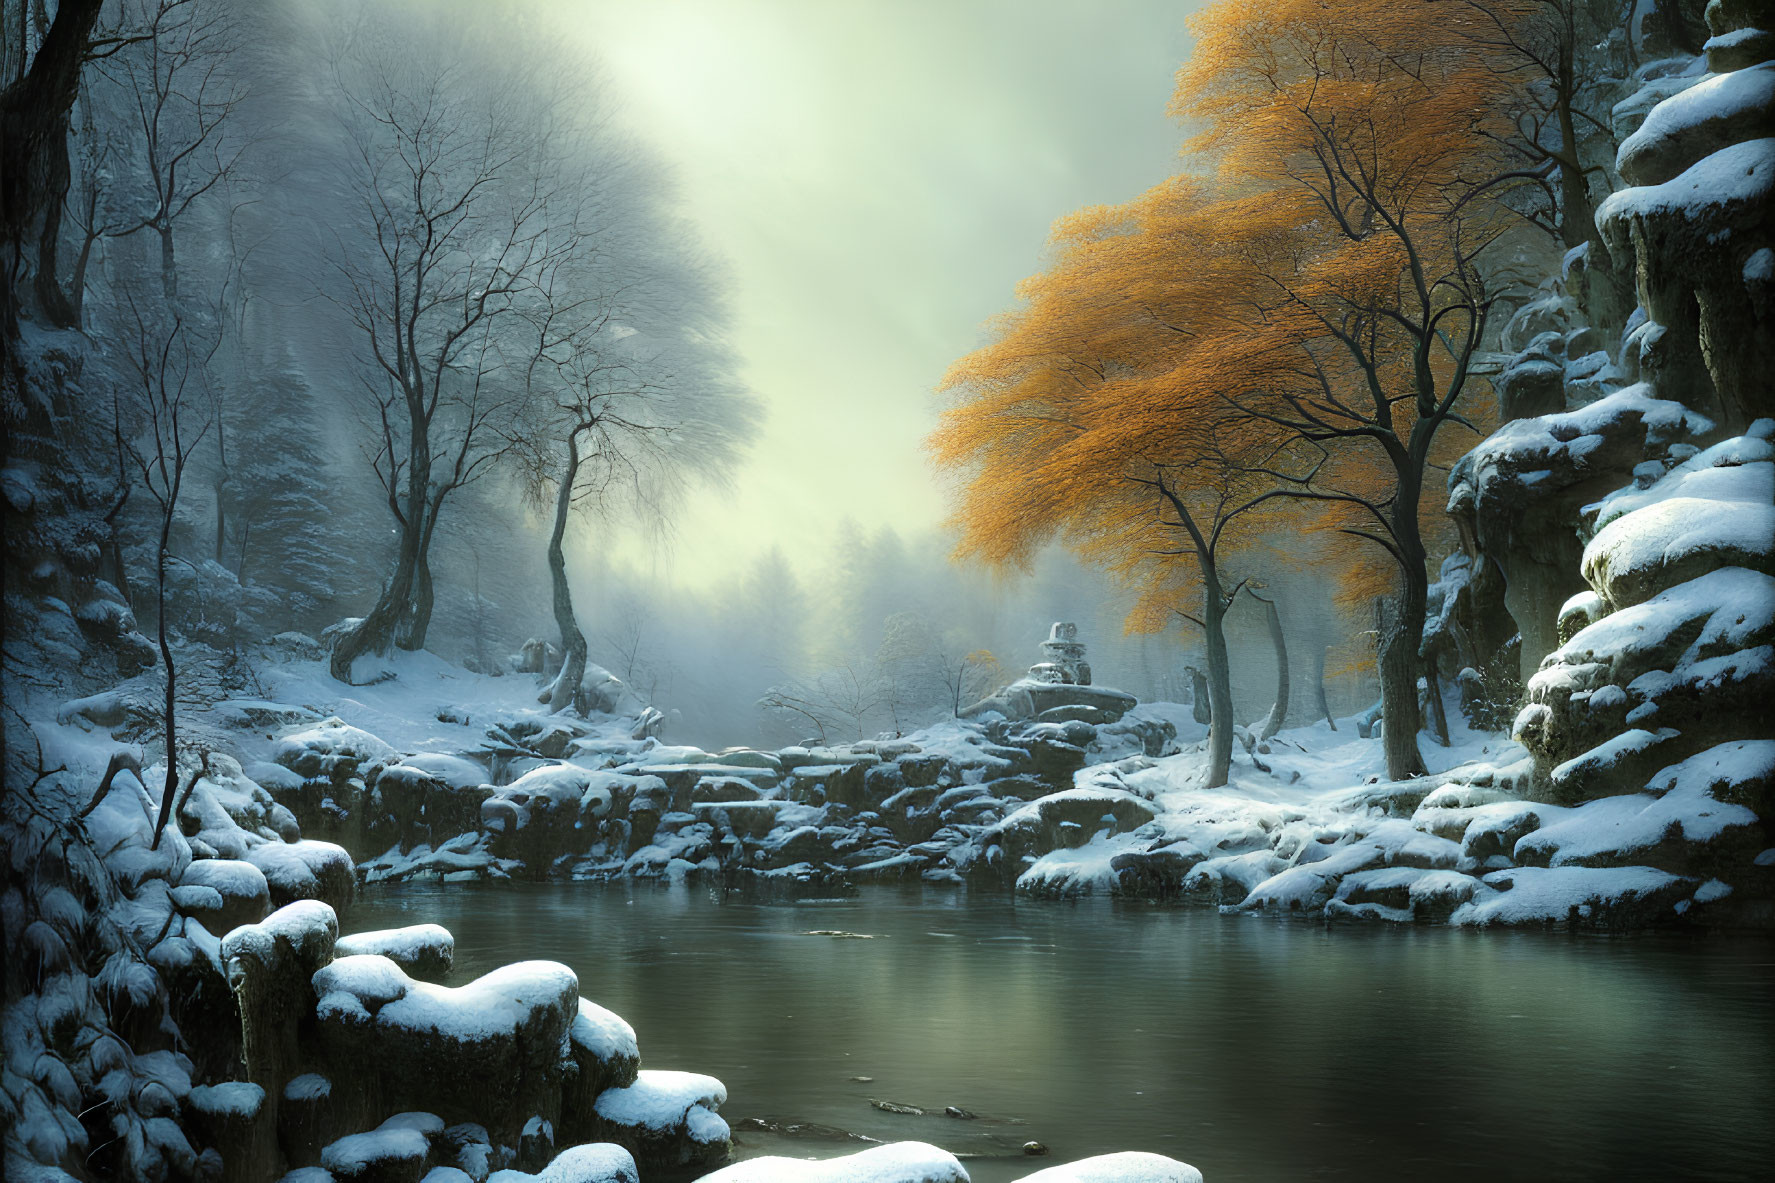 Tranquil winter scene with river, snow, autumn leaves, and soft light